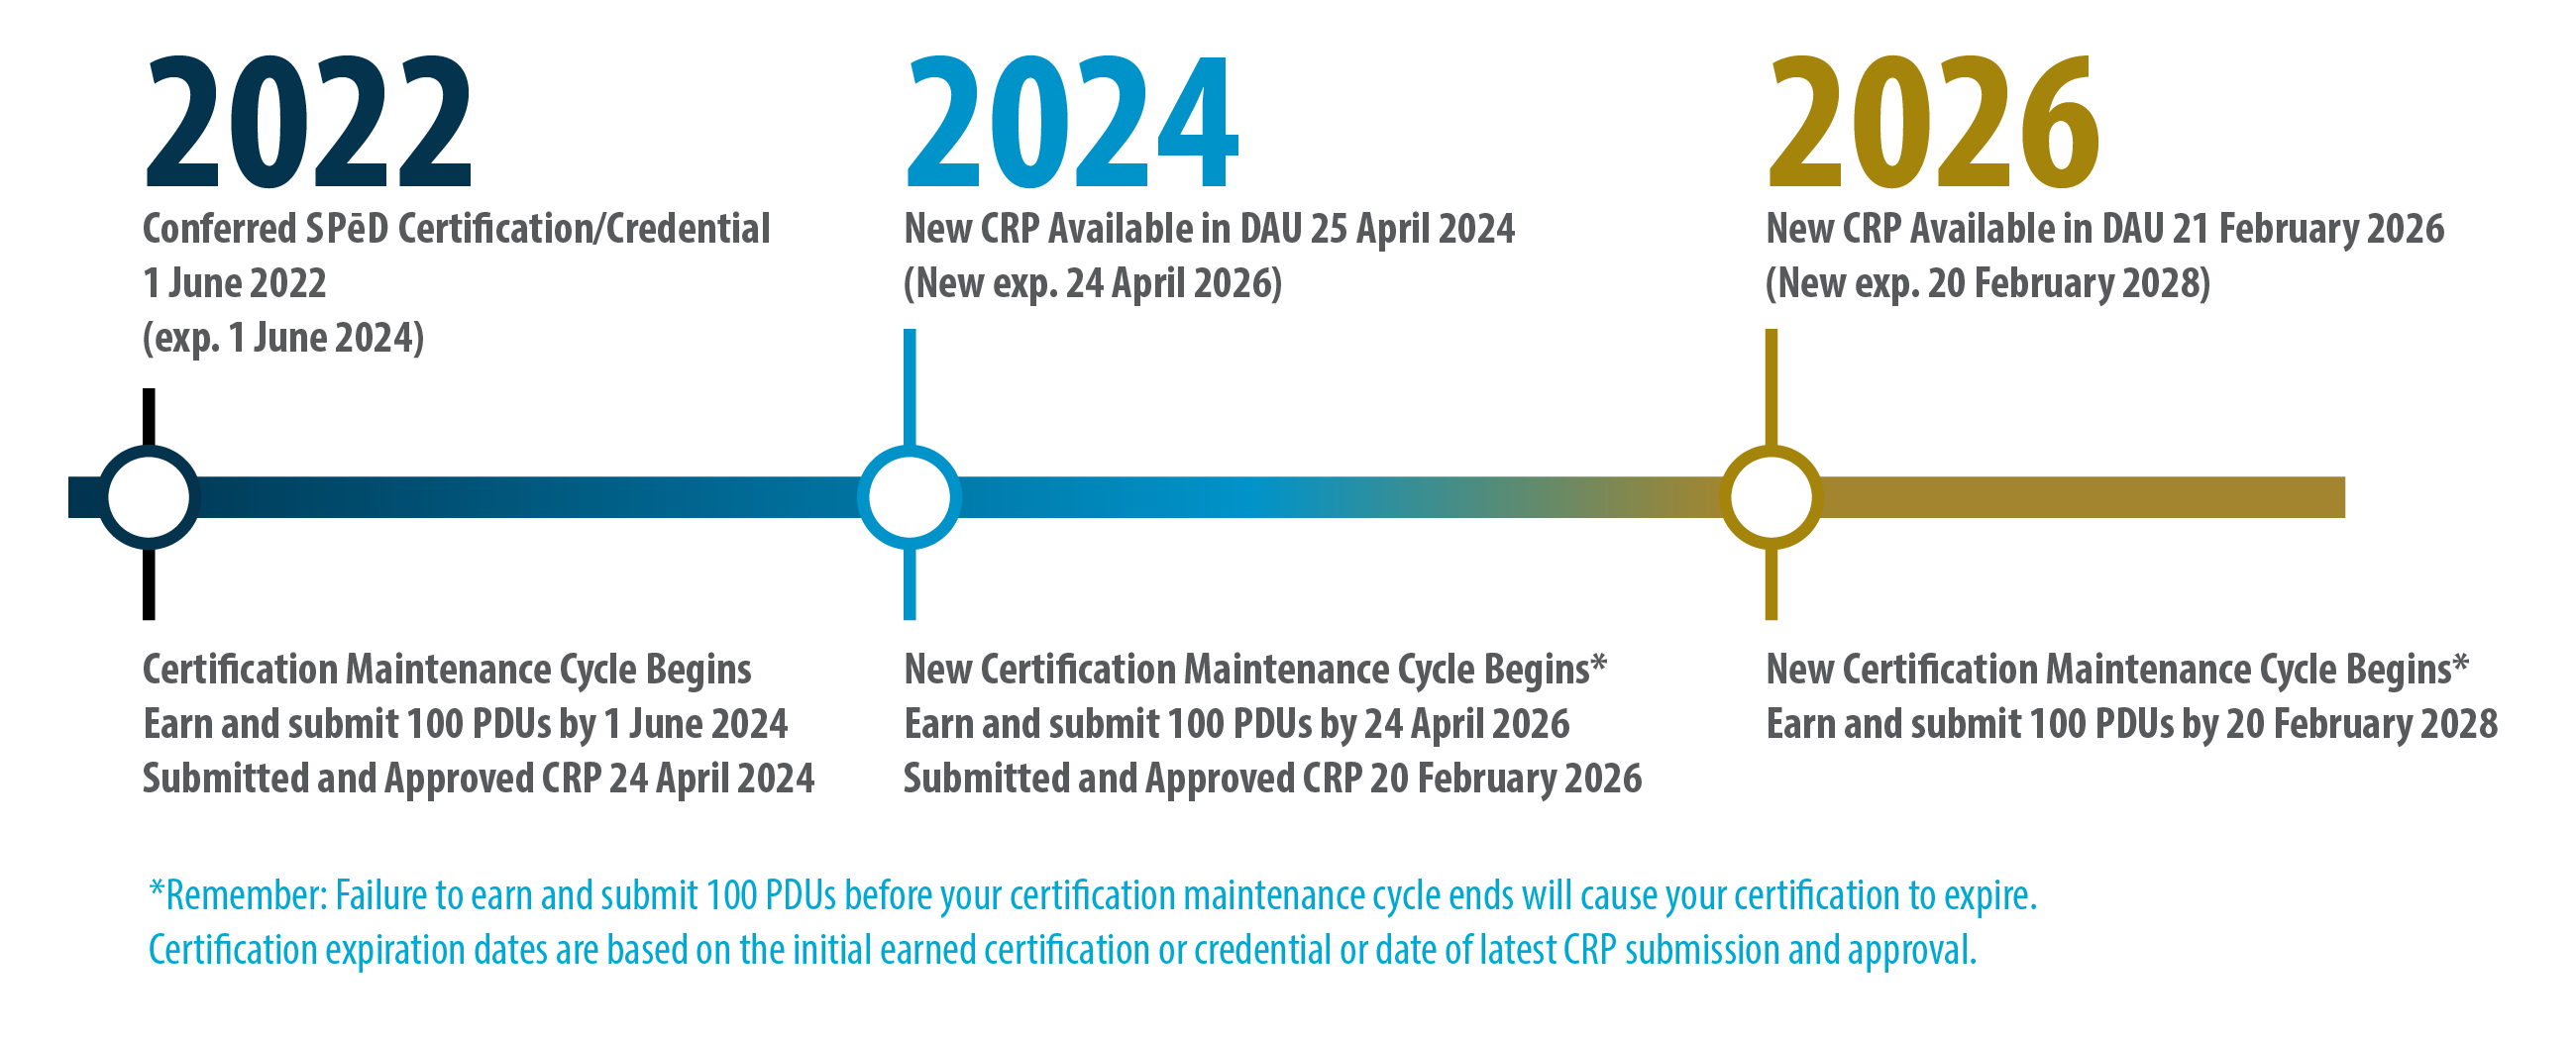 Conferred SPeD Certification/Credential Timeline